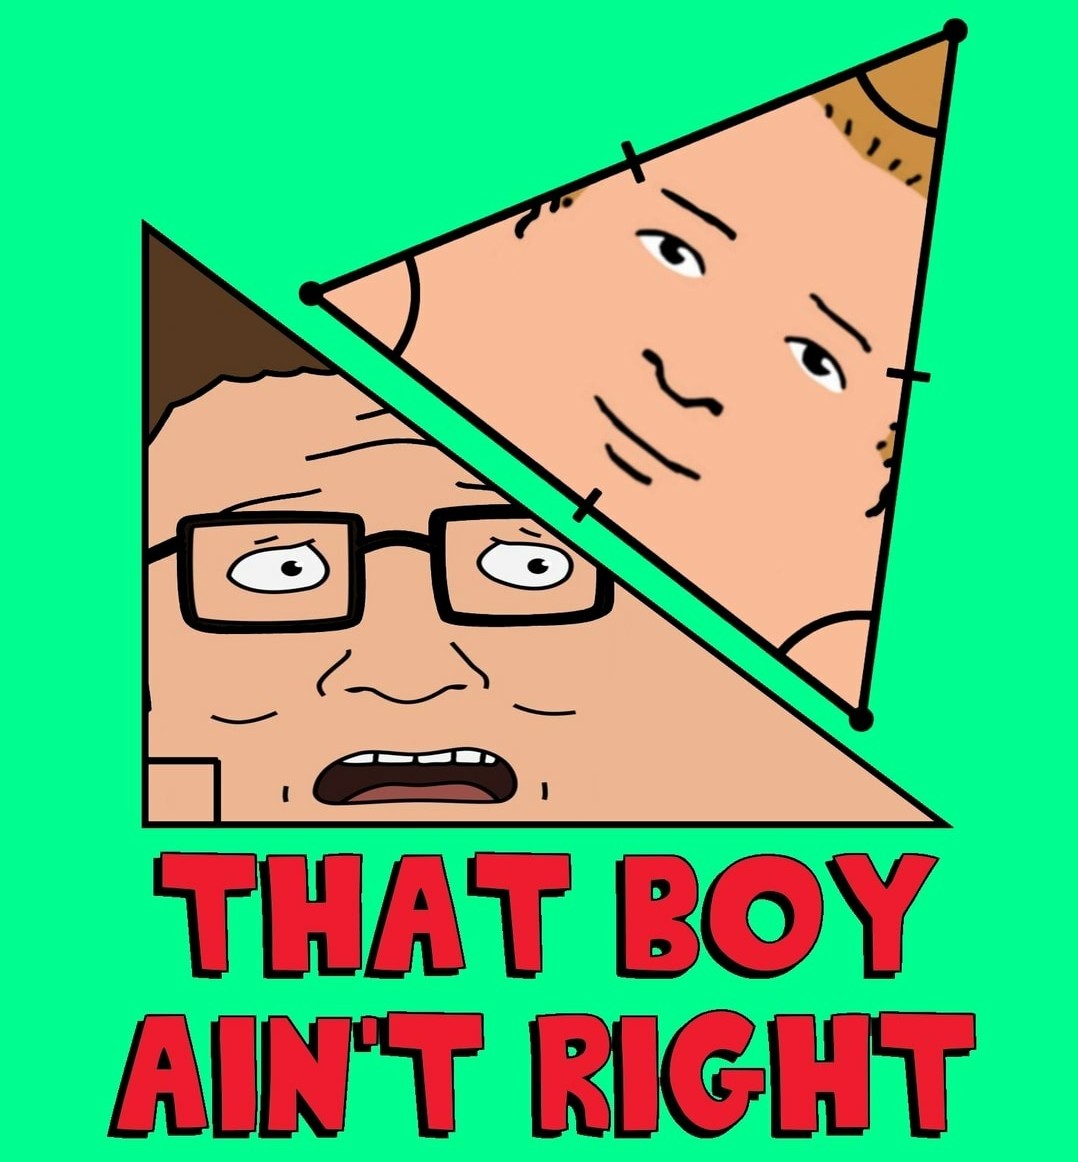 king of the hill,propane,Bobby Hill,Campus147,meme,memes,gifs,funny,picture...